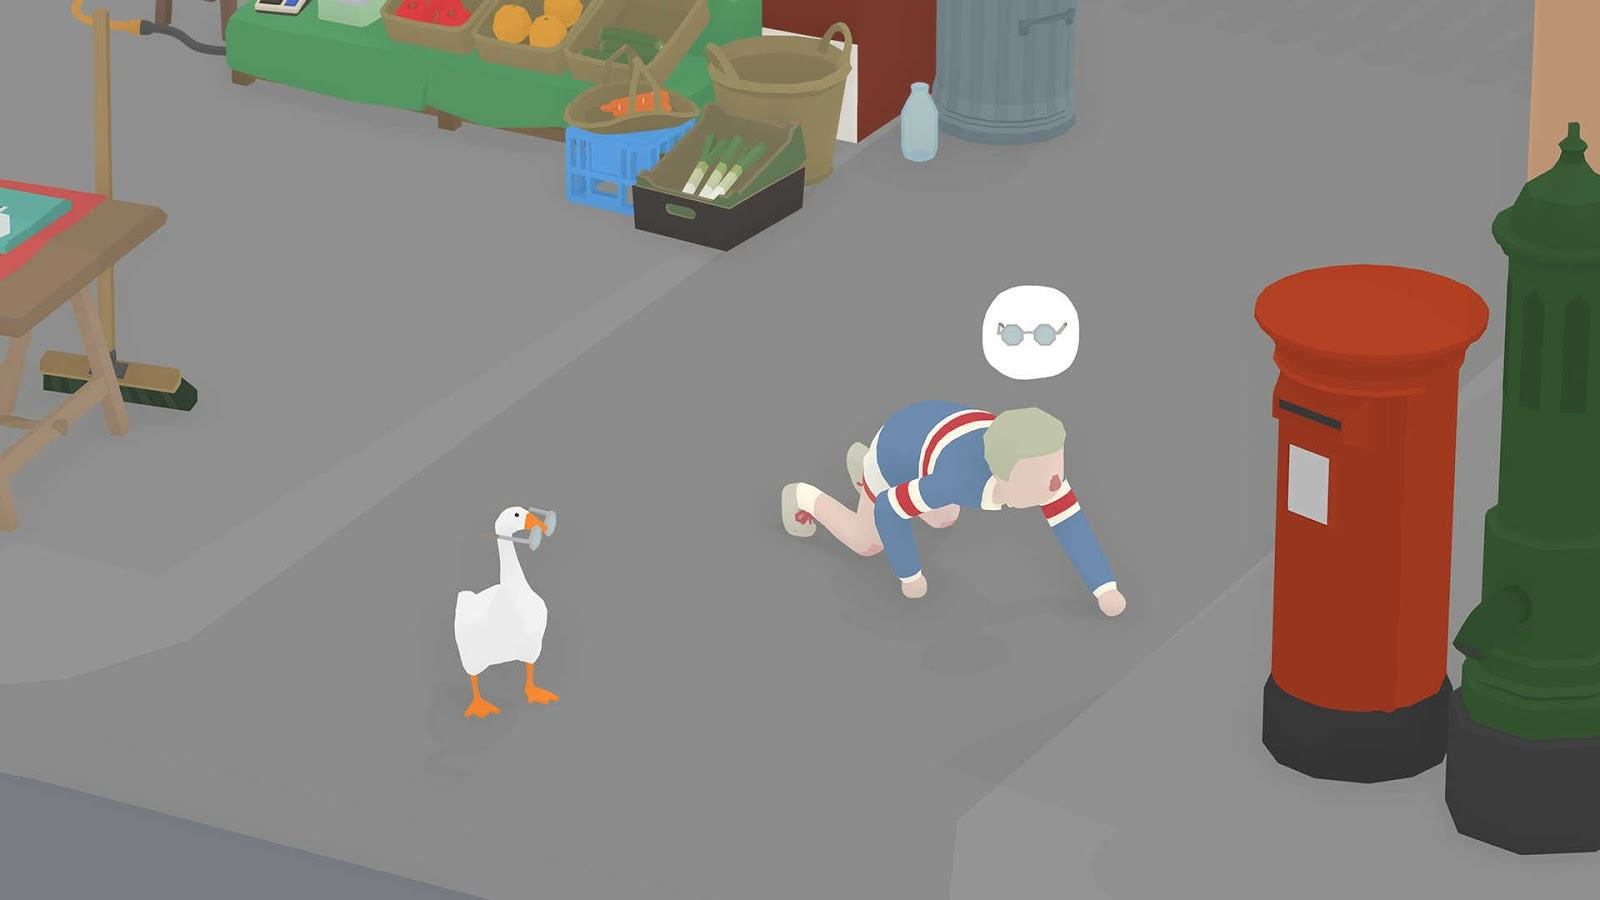 Untitled Goose Game 3